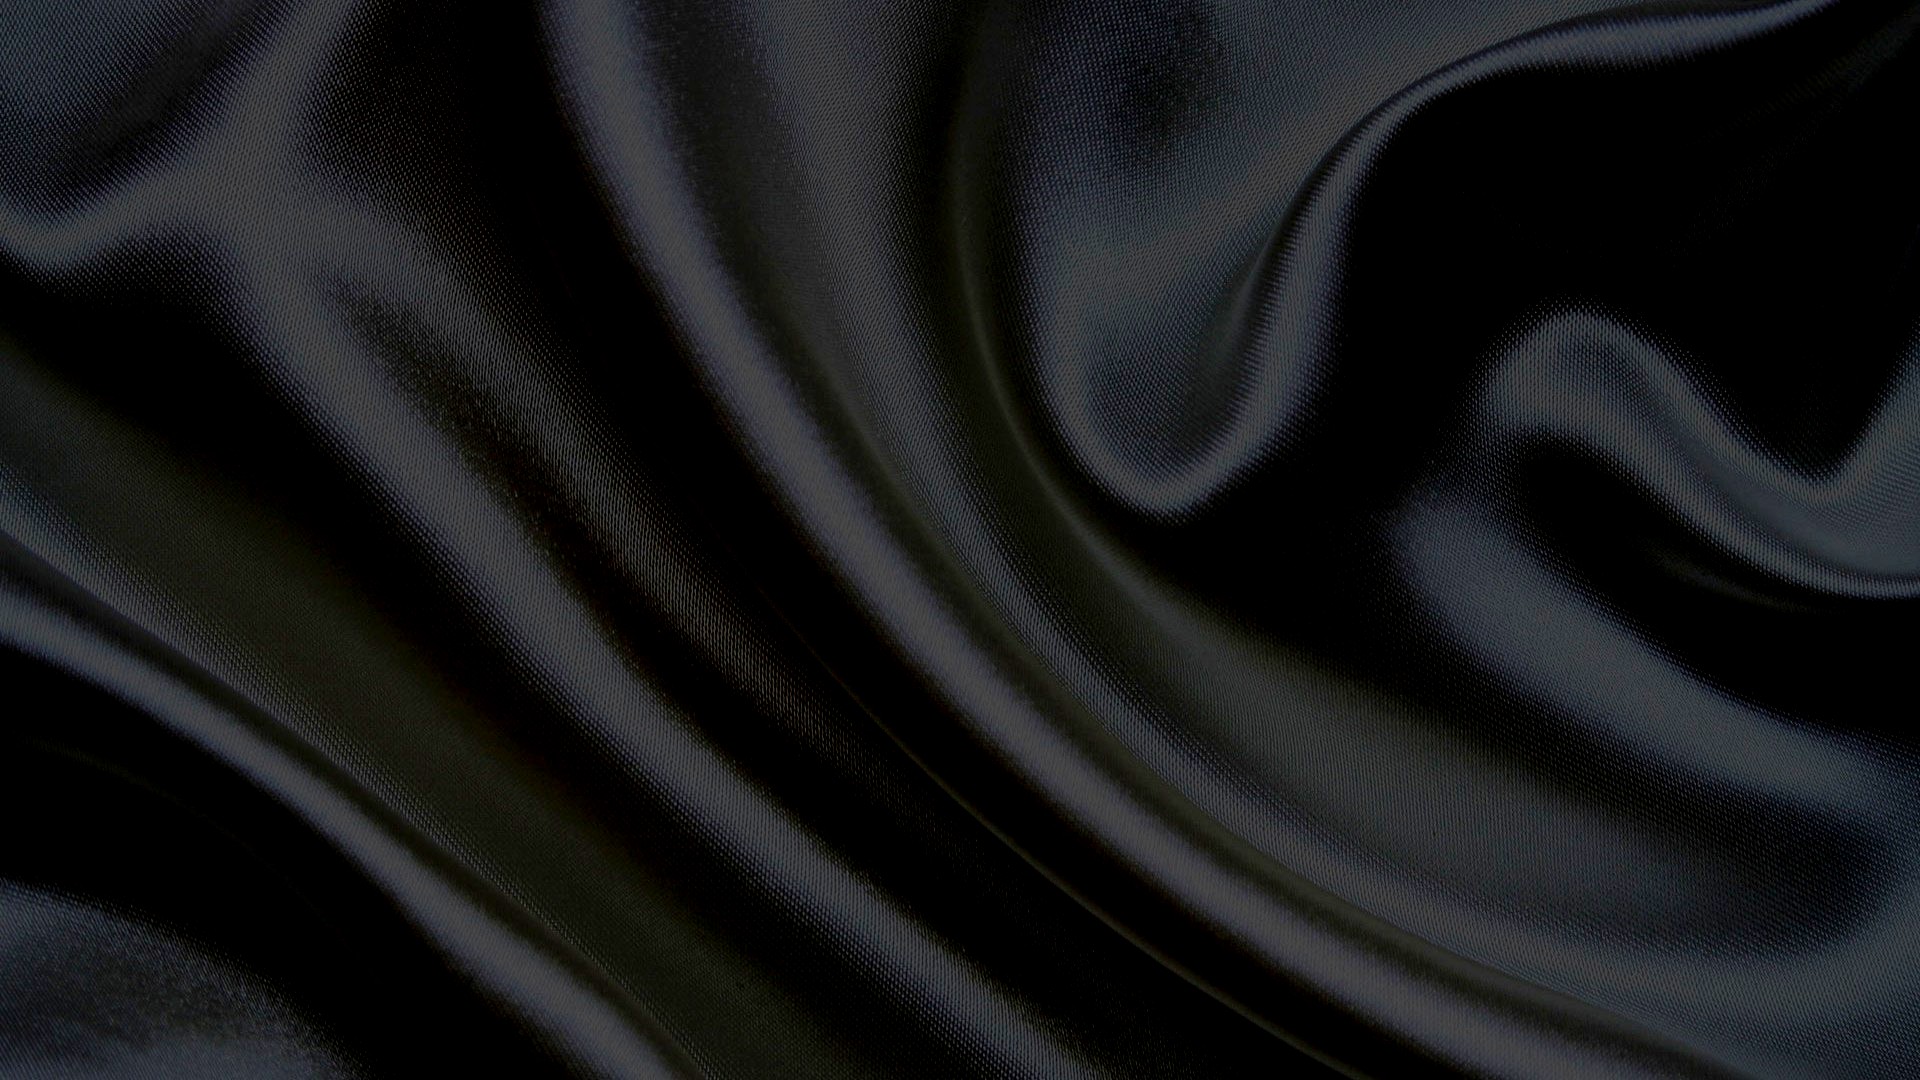 Black Silk iPhone Home Screen Wallpaper with high-resolution 1920x1080 pixel. You can set as wallpaper for Apple iPhone X, XS Max, XR, 8, 7, 6, SE, iPad. Enjoy and share your favorite HD wallpapers and background images